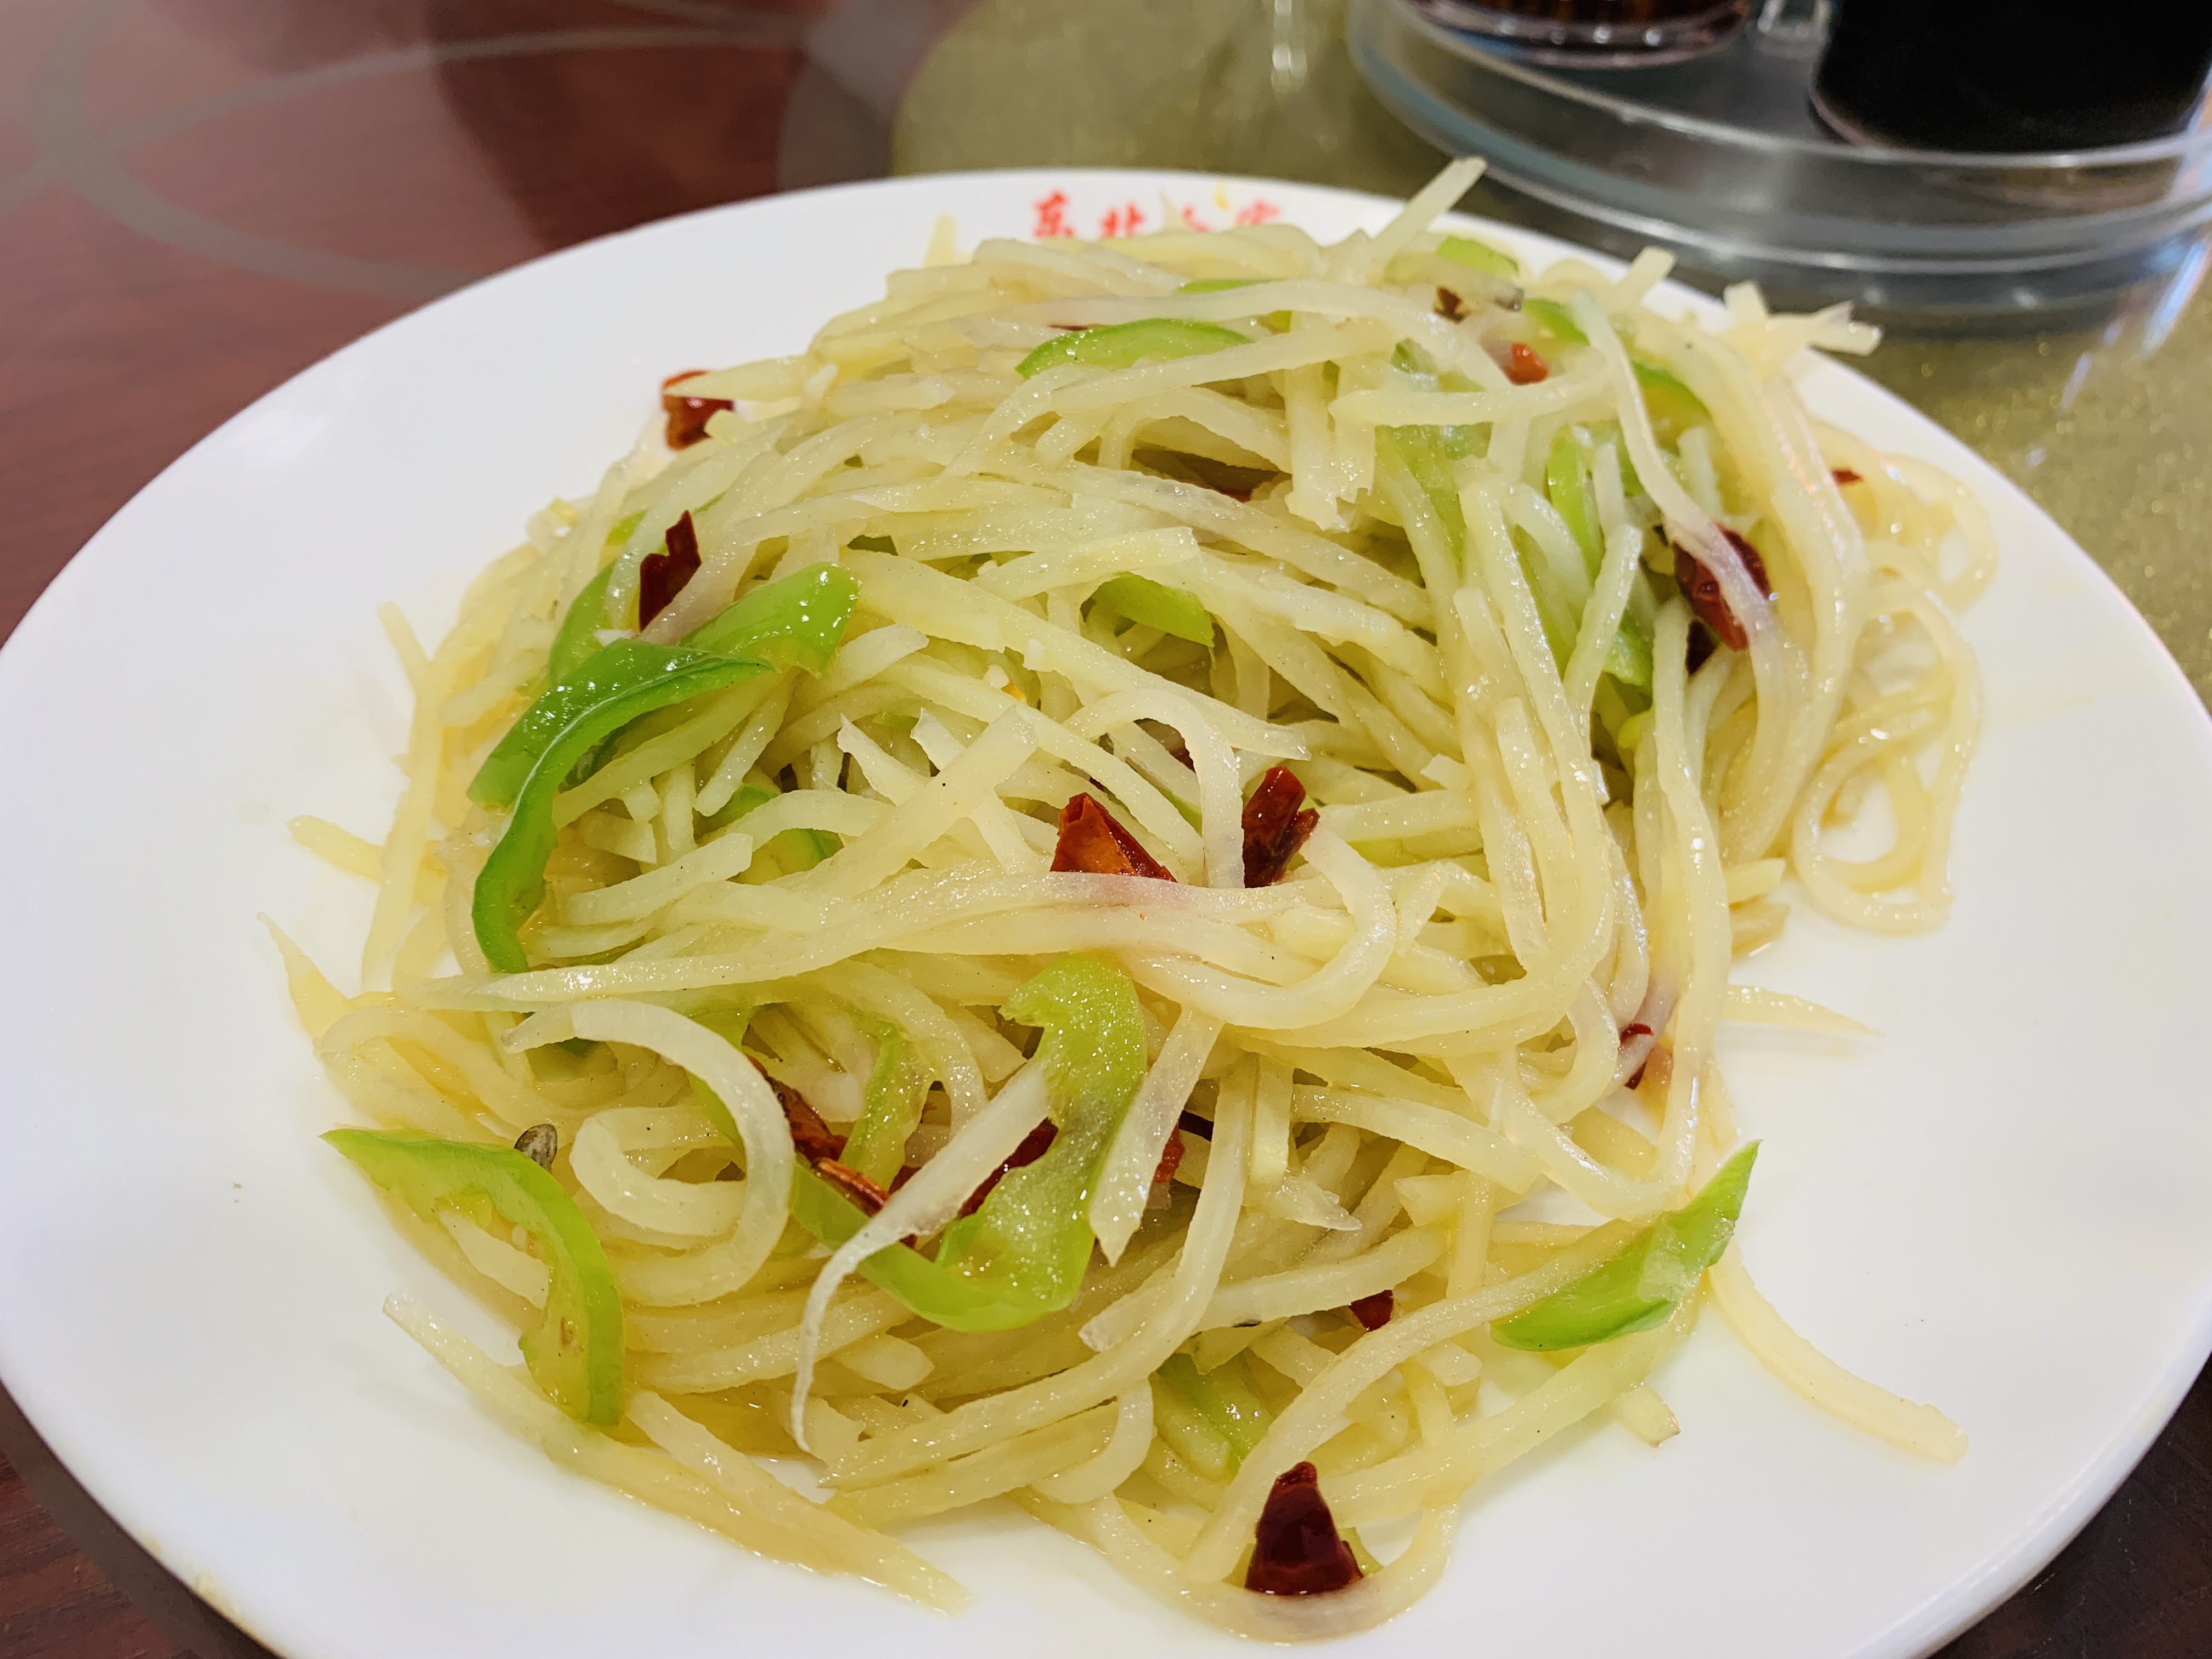 Dong Bei Ren Jia - Sauteed Hot and Sour Shredded Potato with Green Pepper